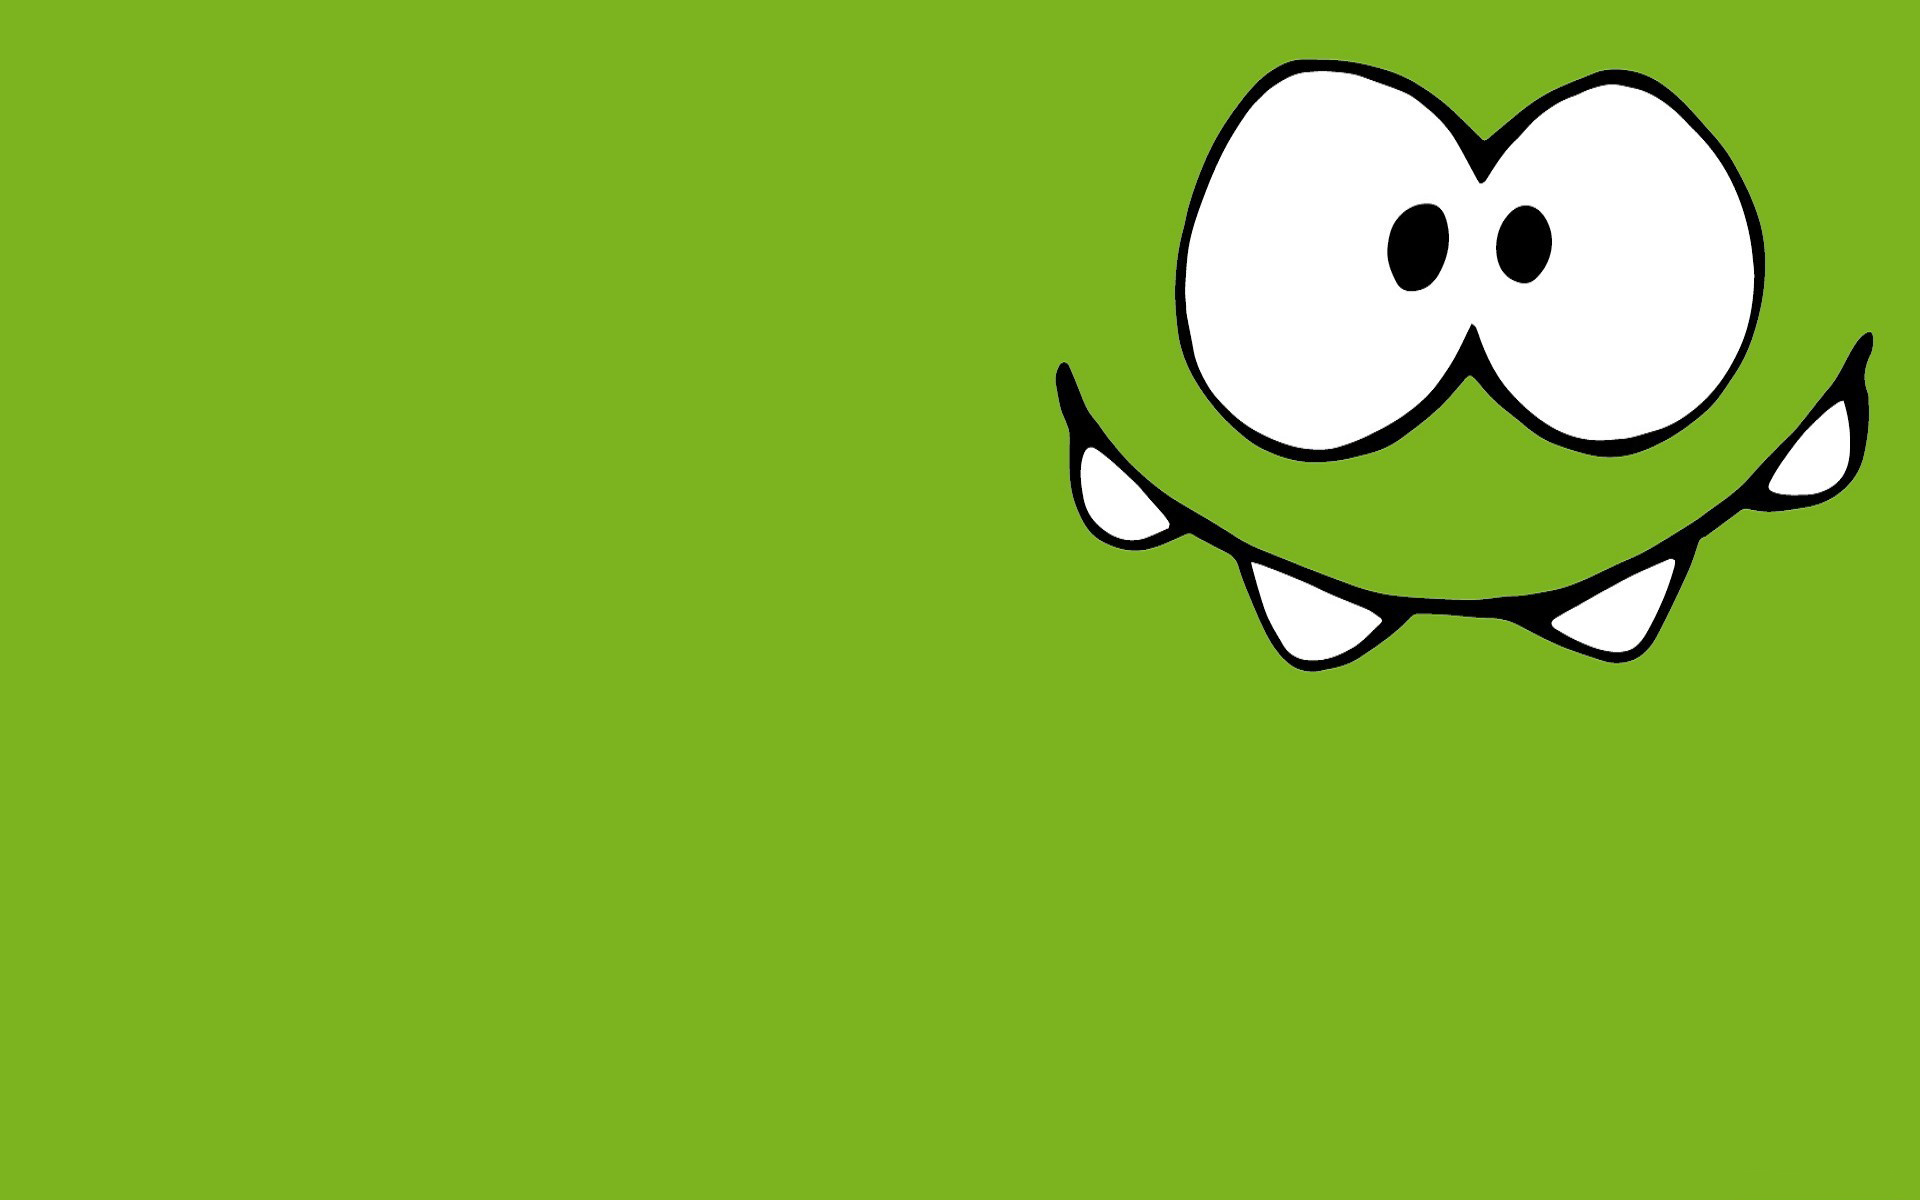 Nibbler with eyes on green background